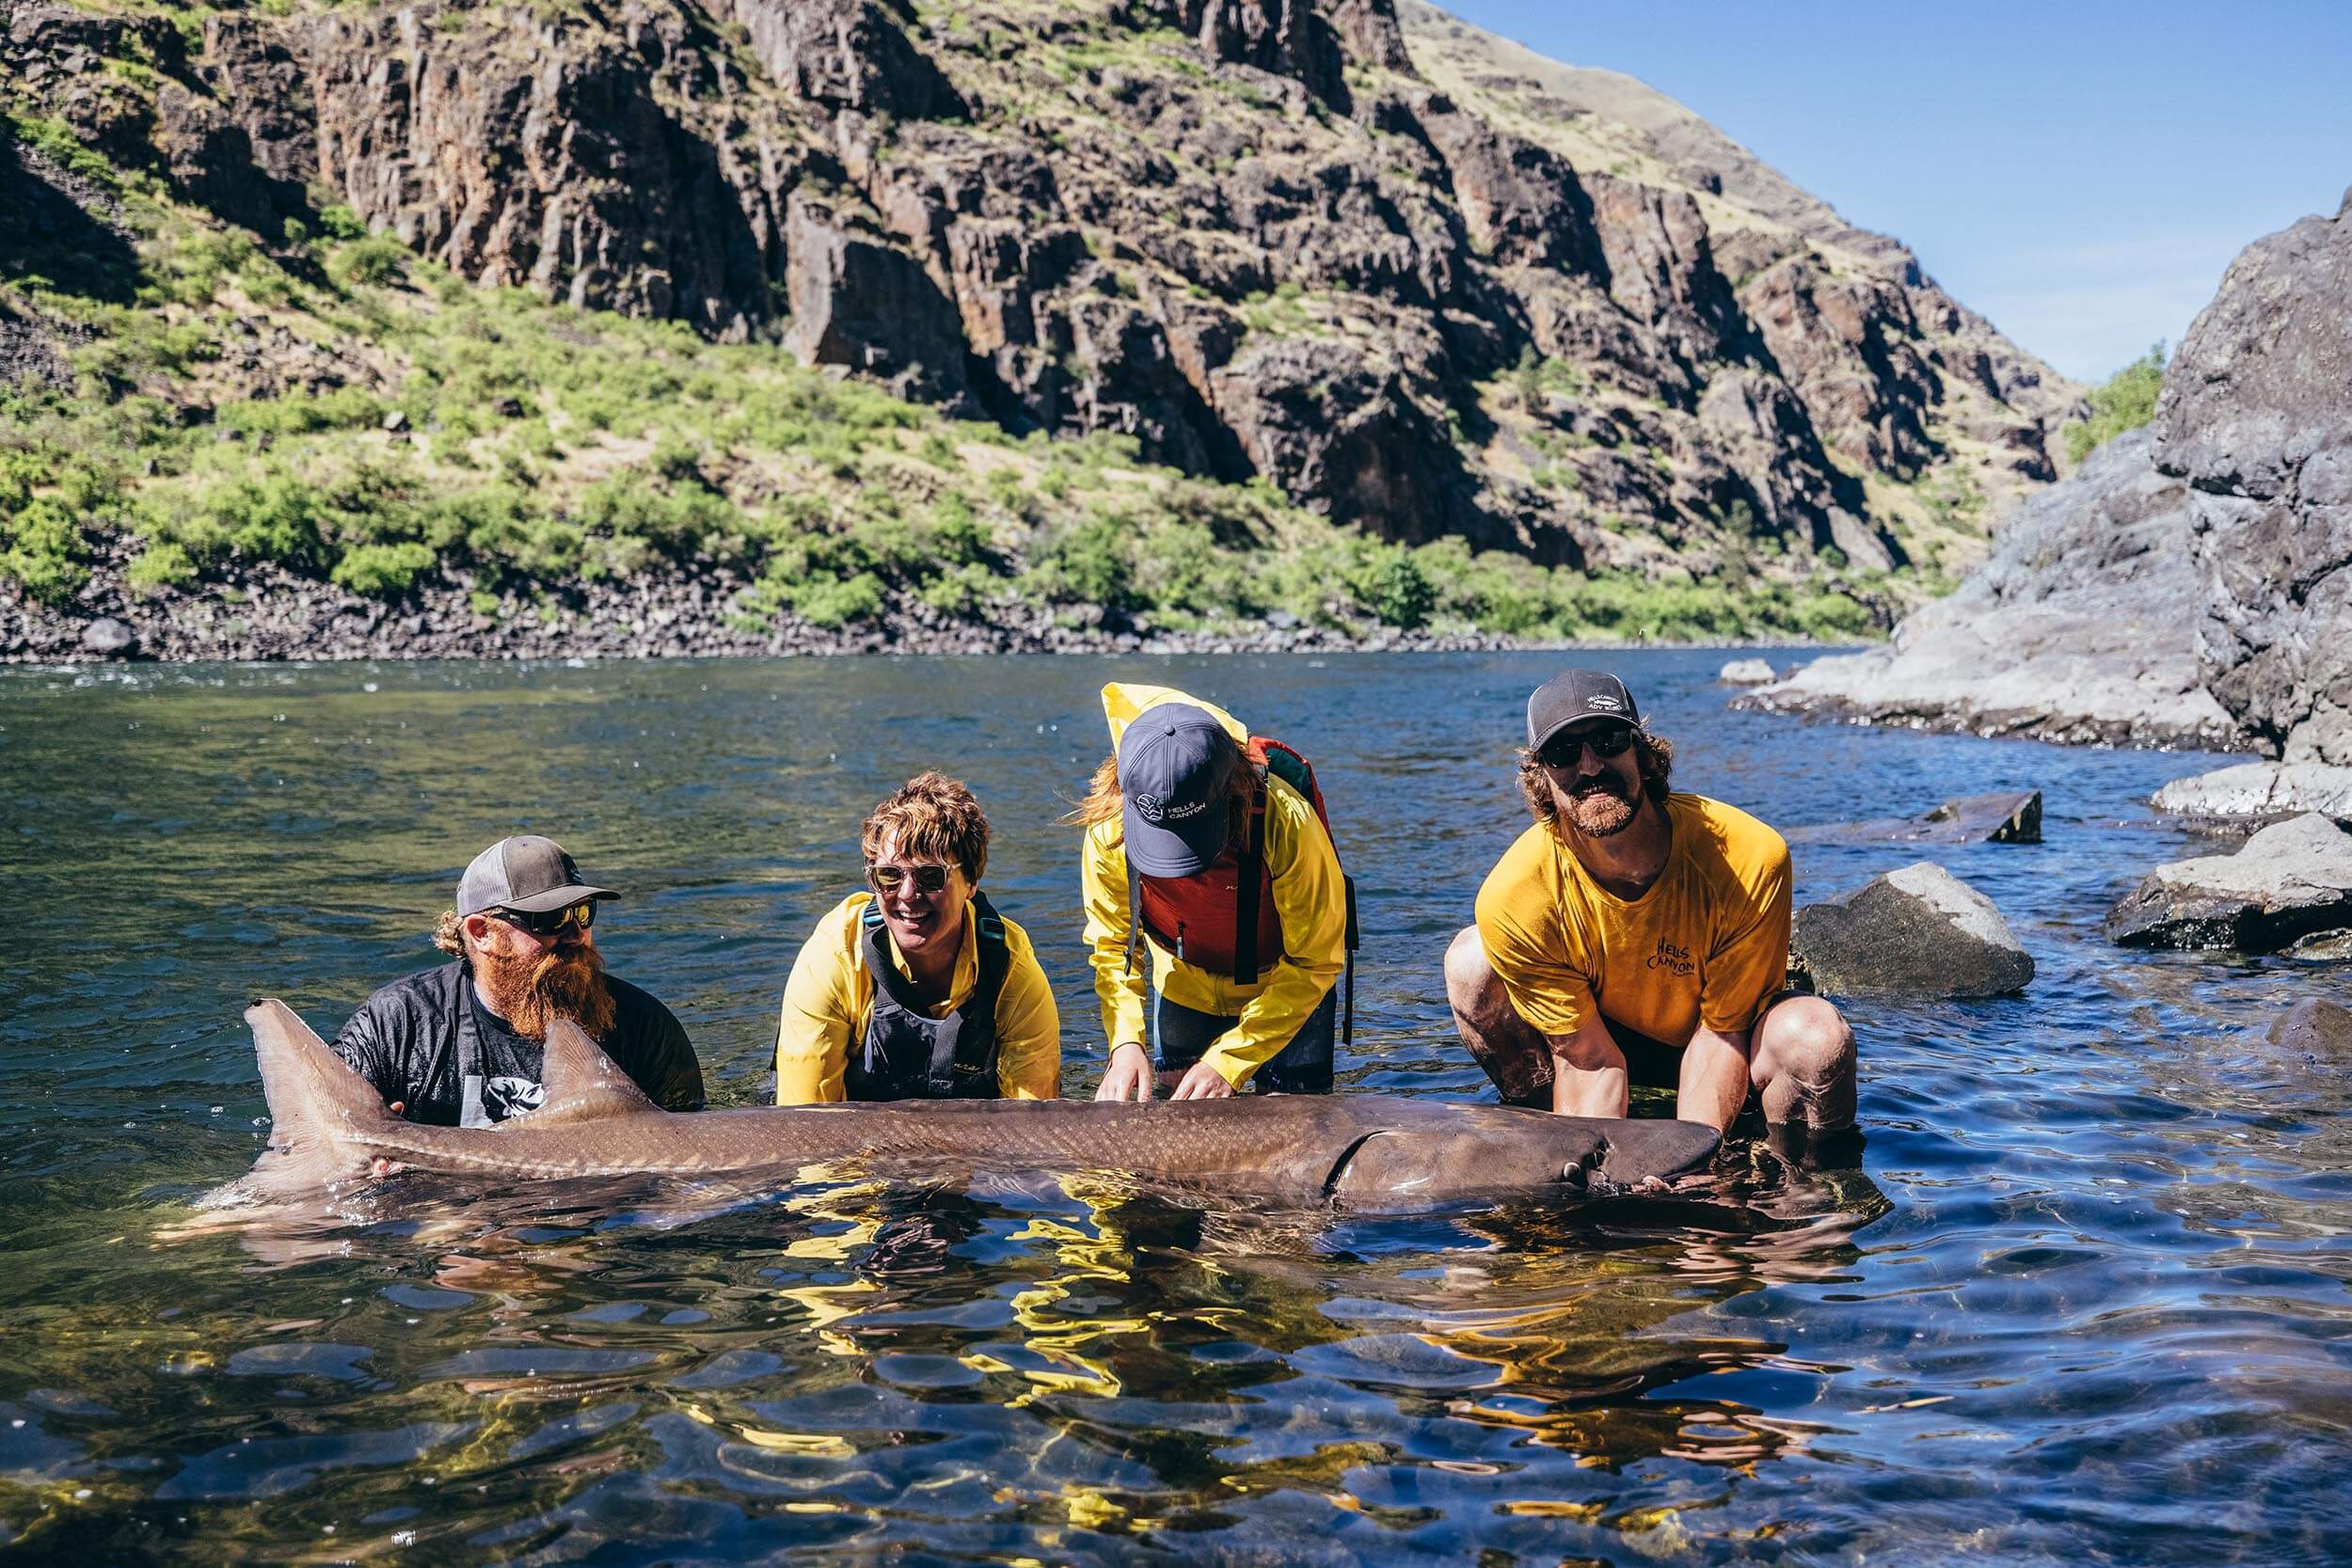 four people standing in a river holding up a Sturgeon fish